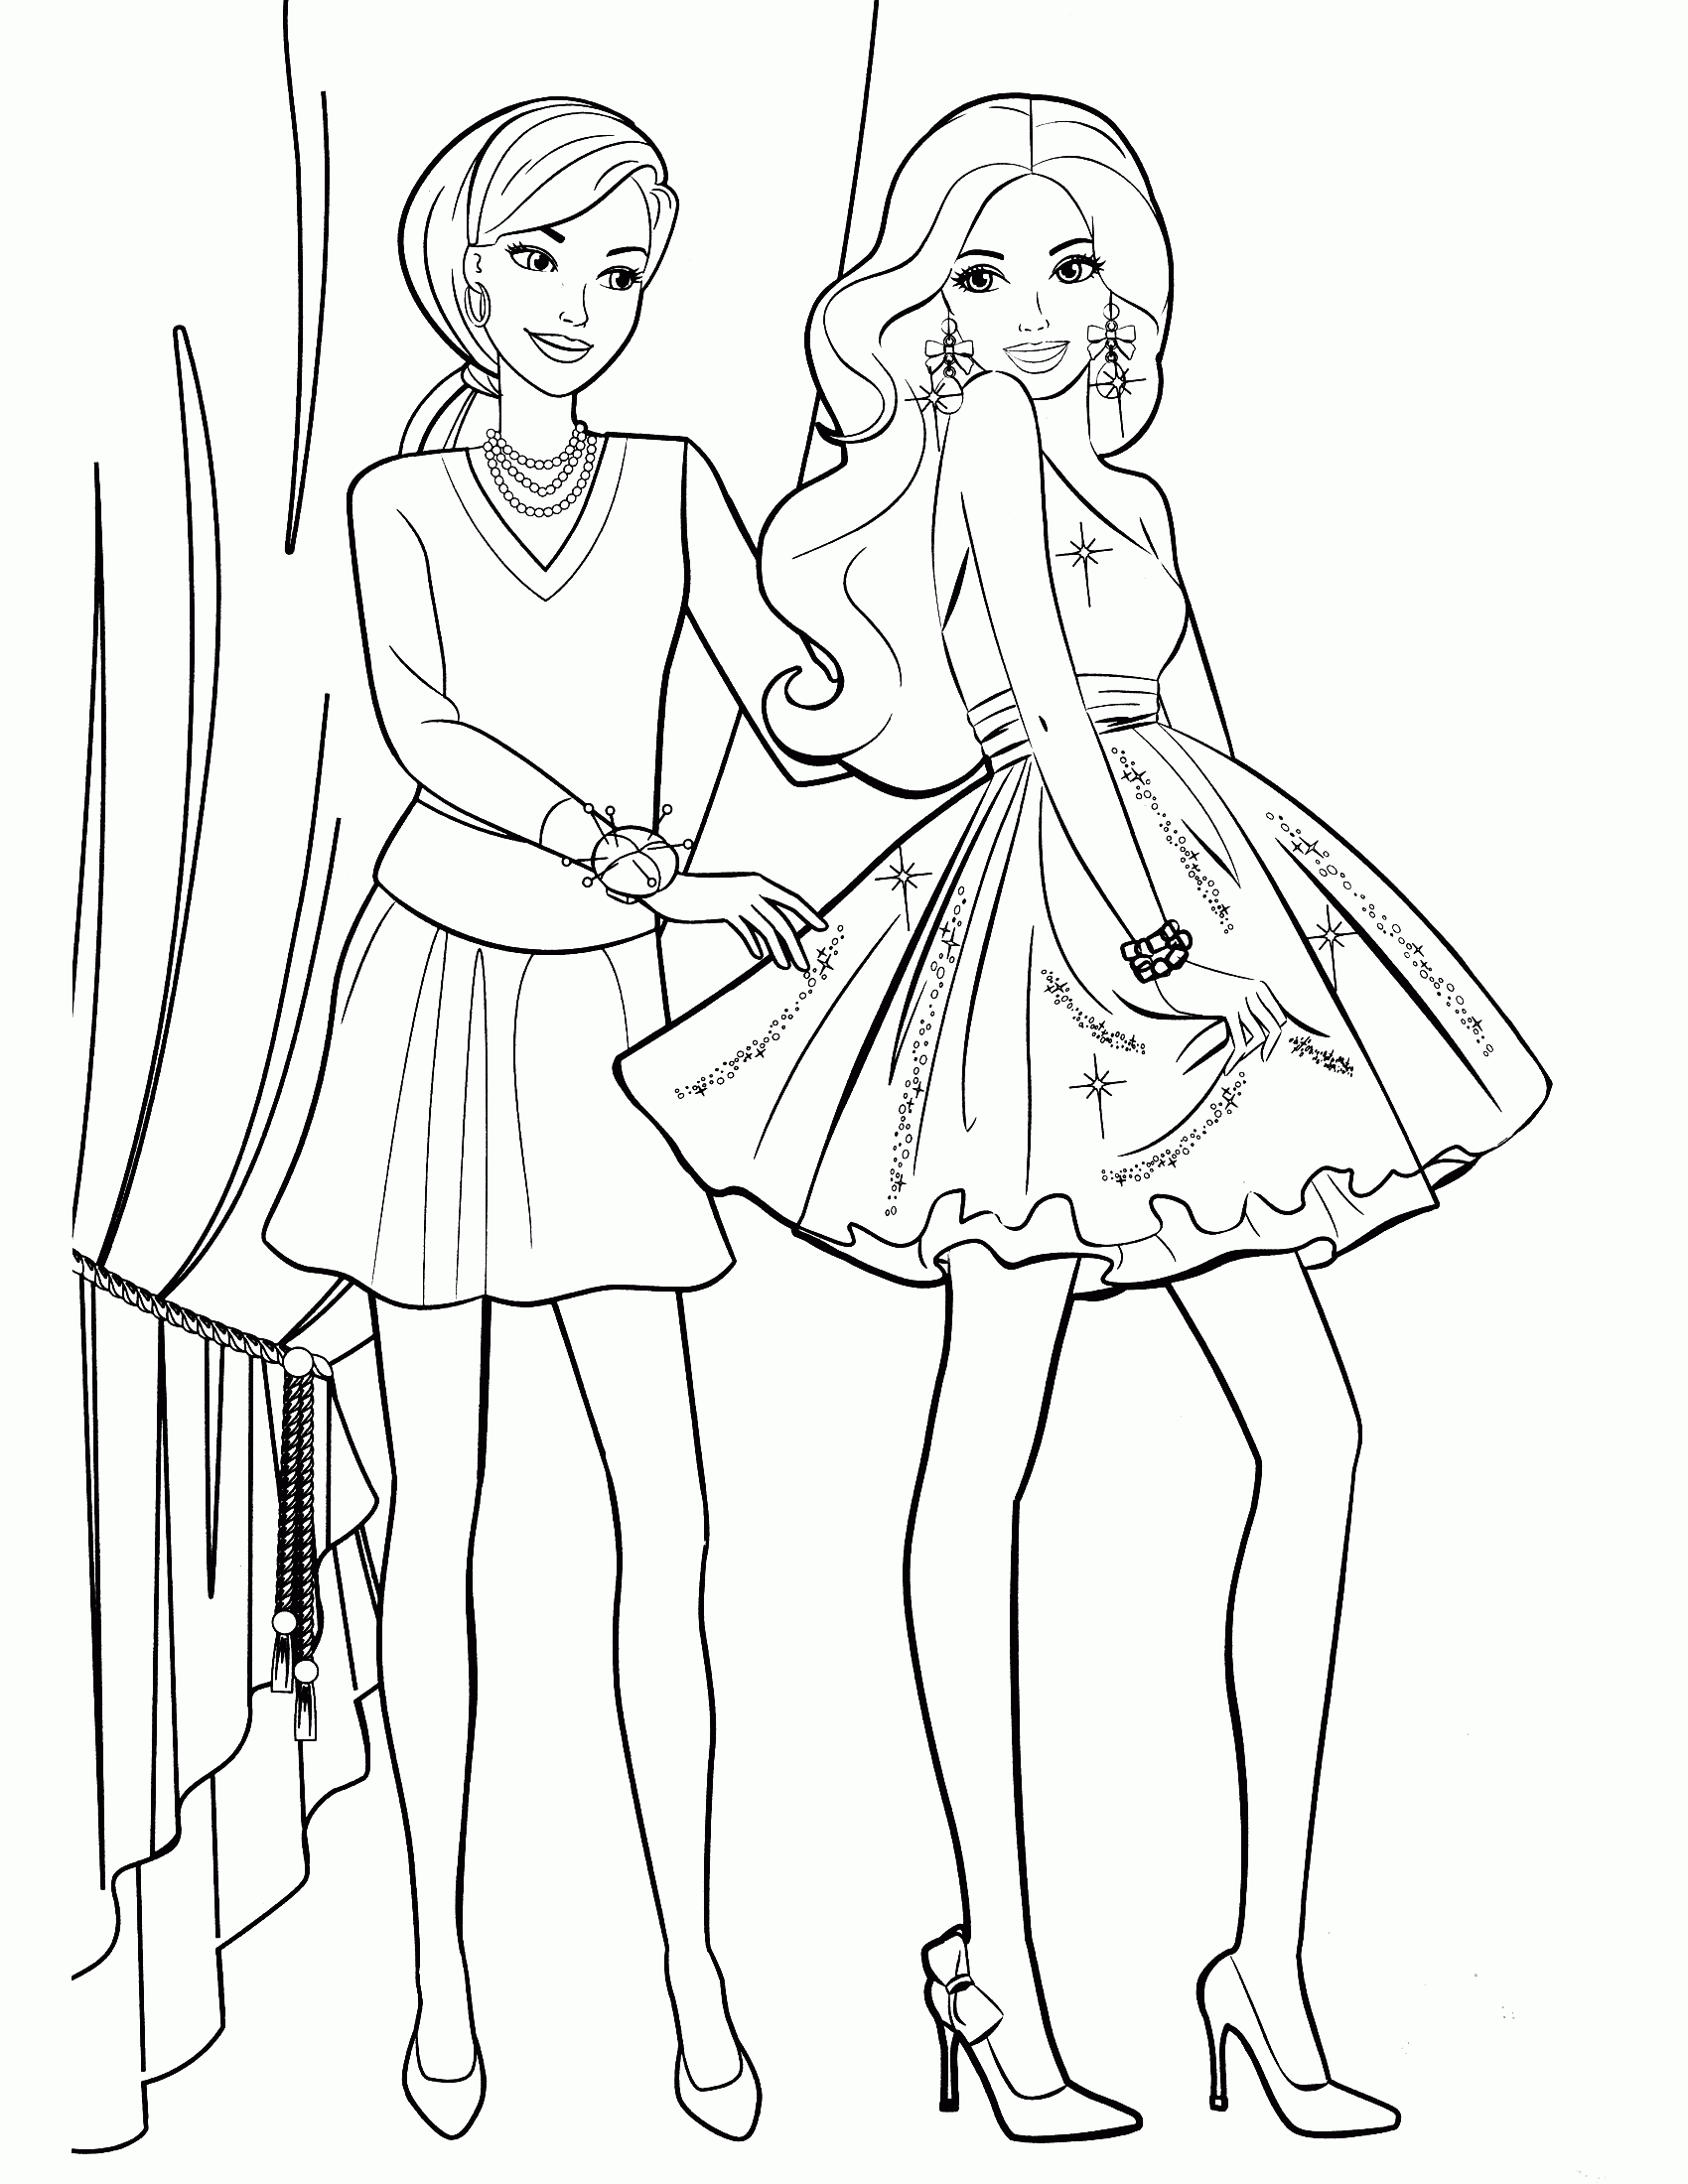 Barbie Car Coloring Pages For Girls - Coloring Pages For All Ages